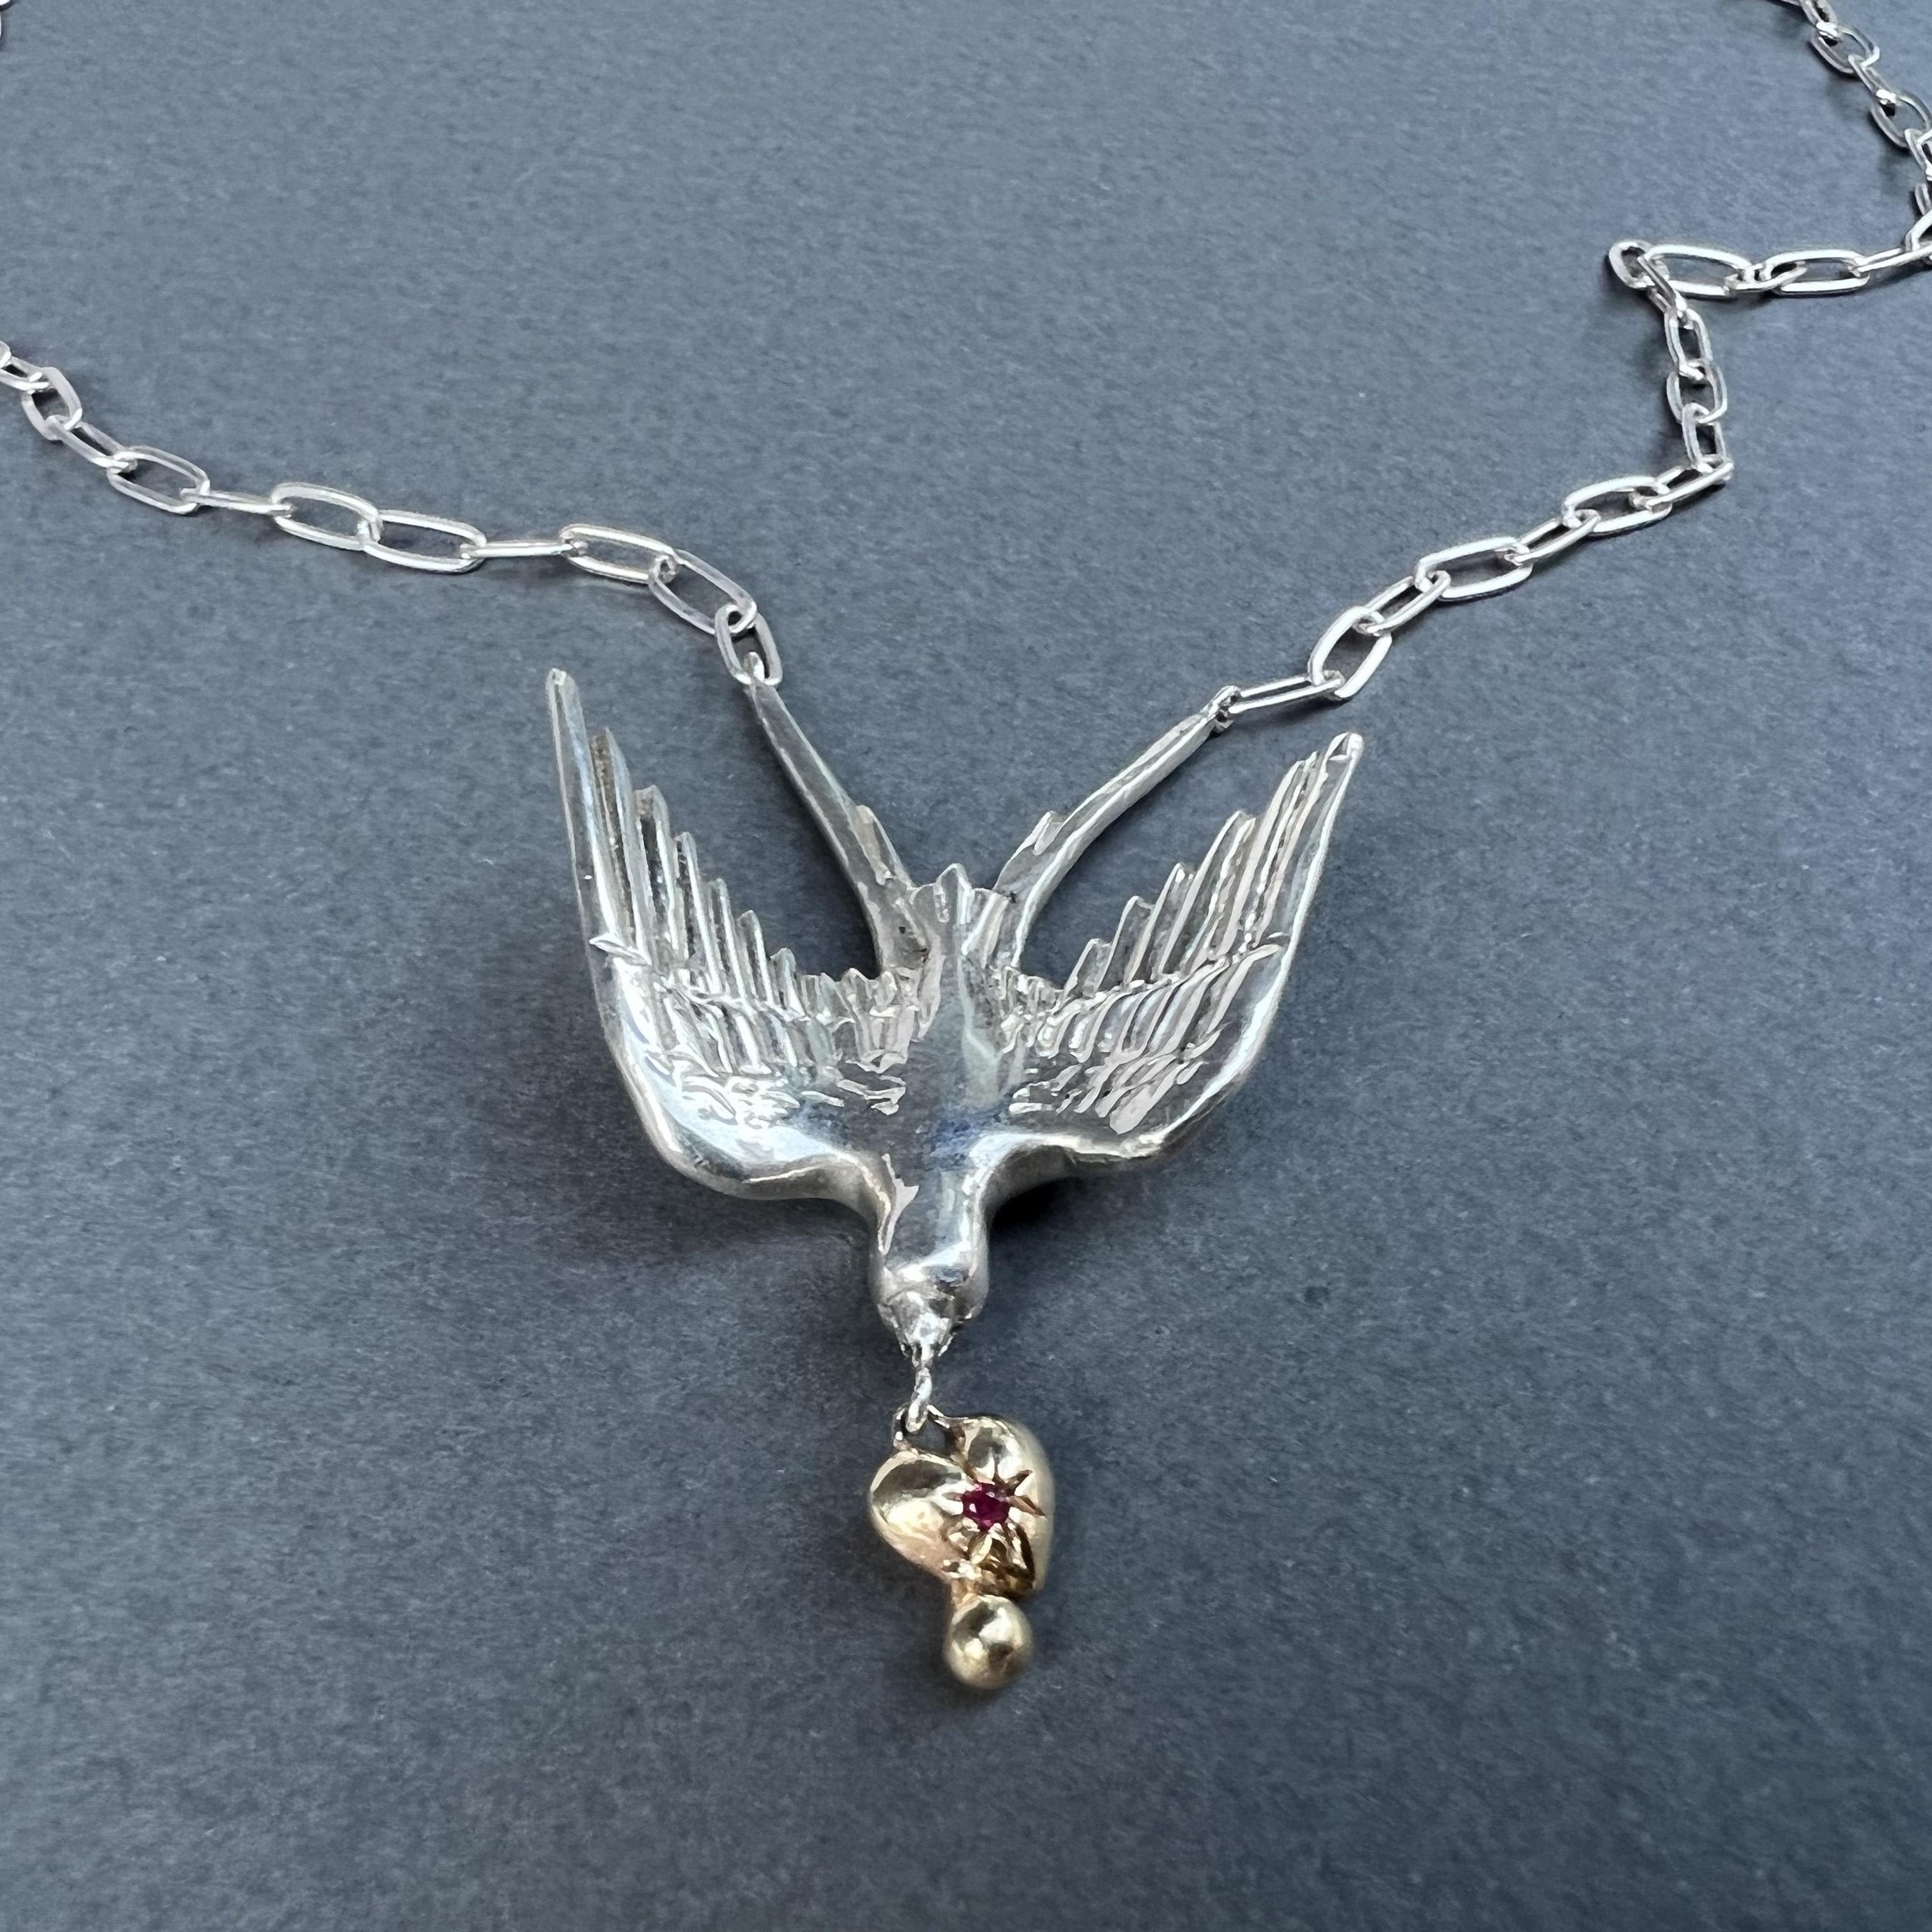 Women's Heart Dove Necklace Gold Silver Chain Ruby Victorian Style J Dauphin For Sale